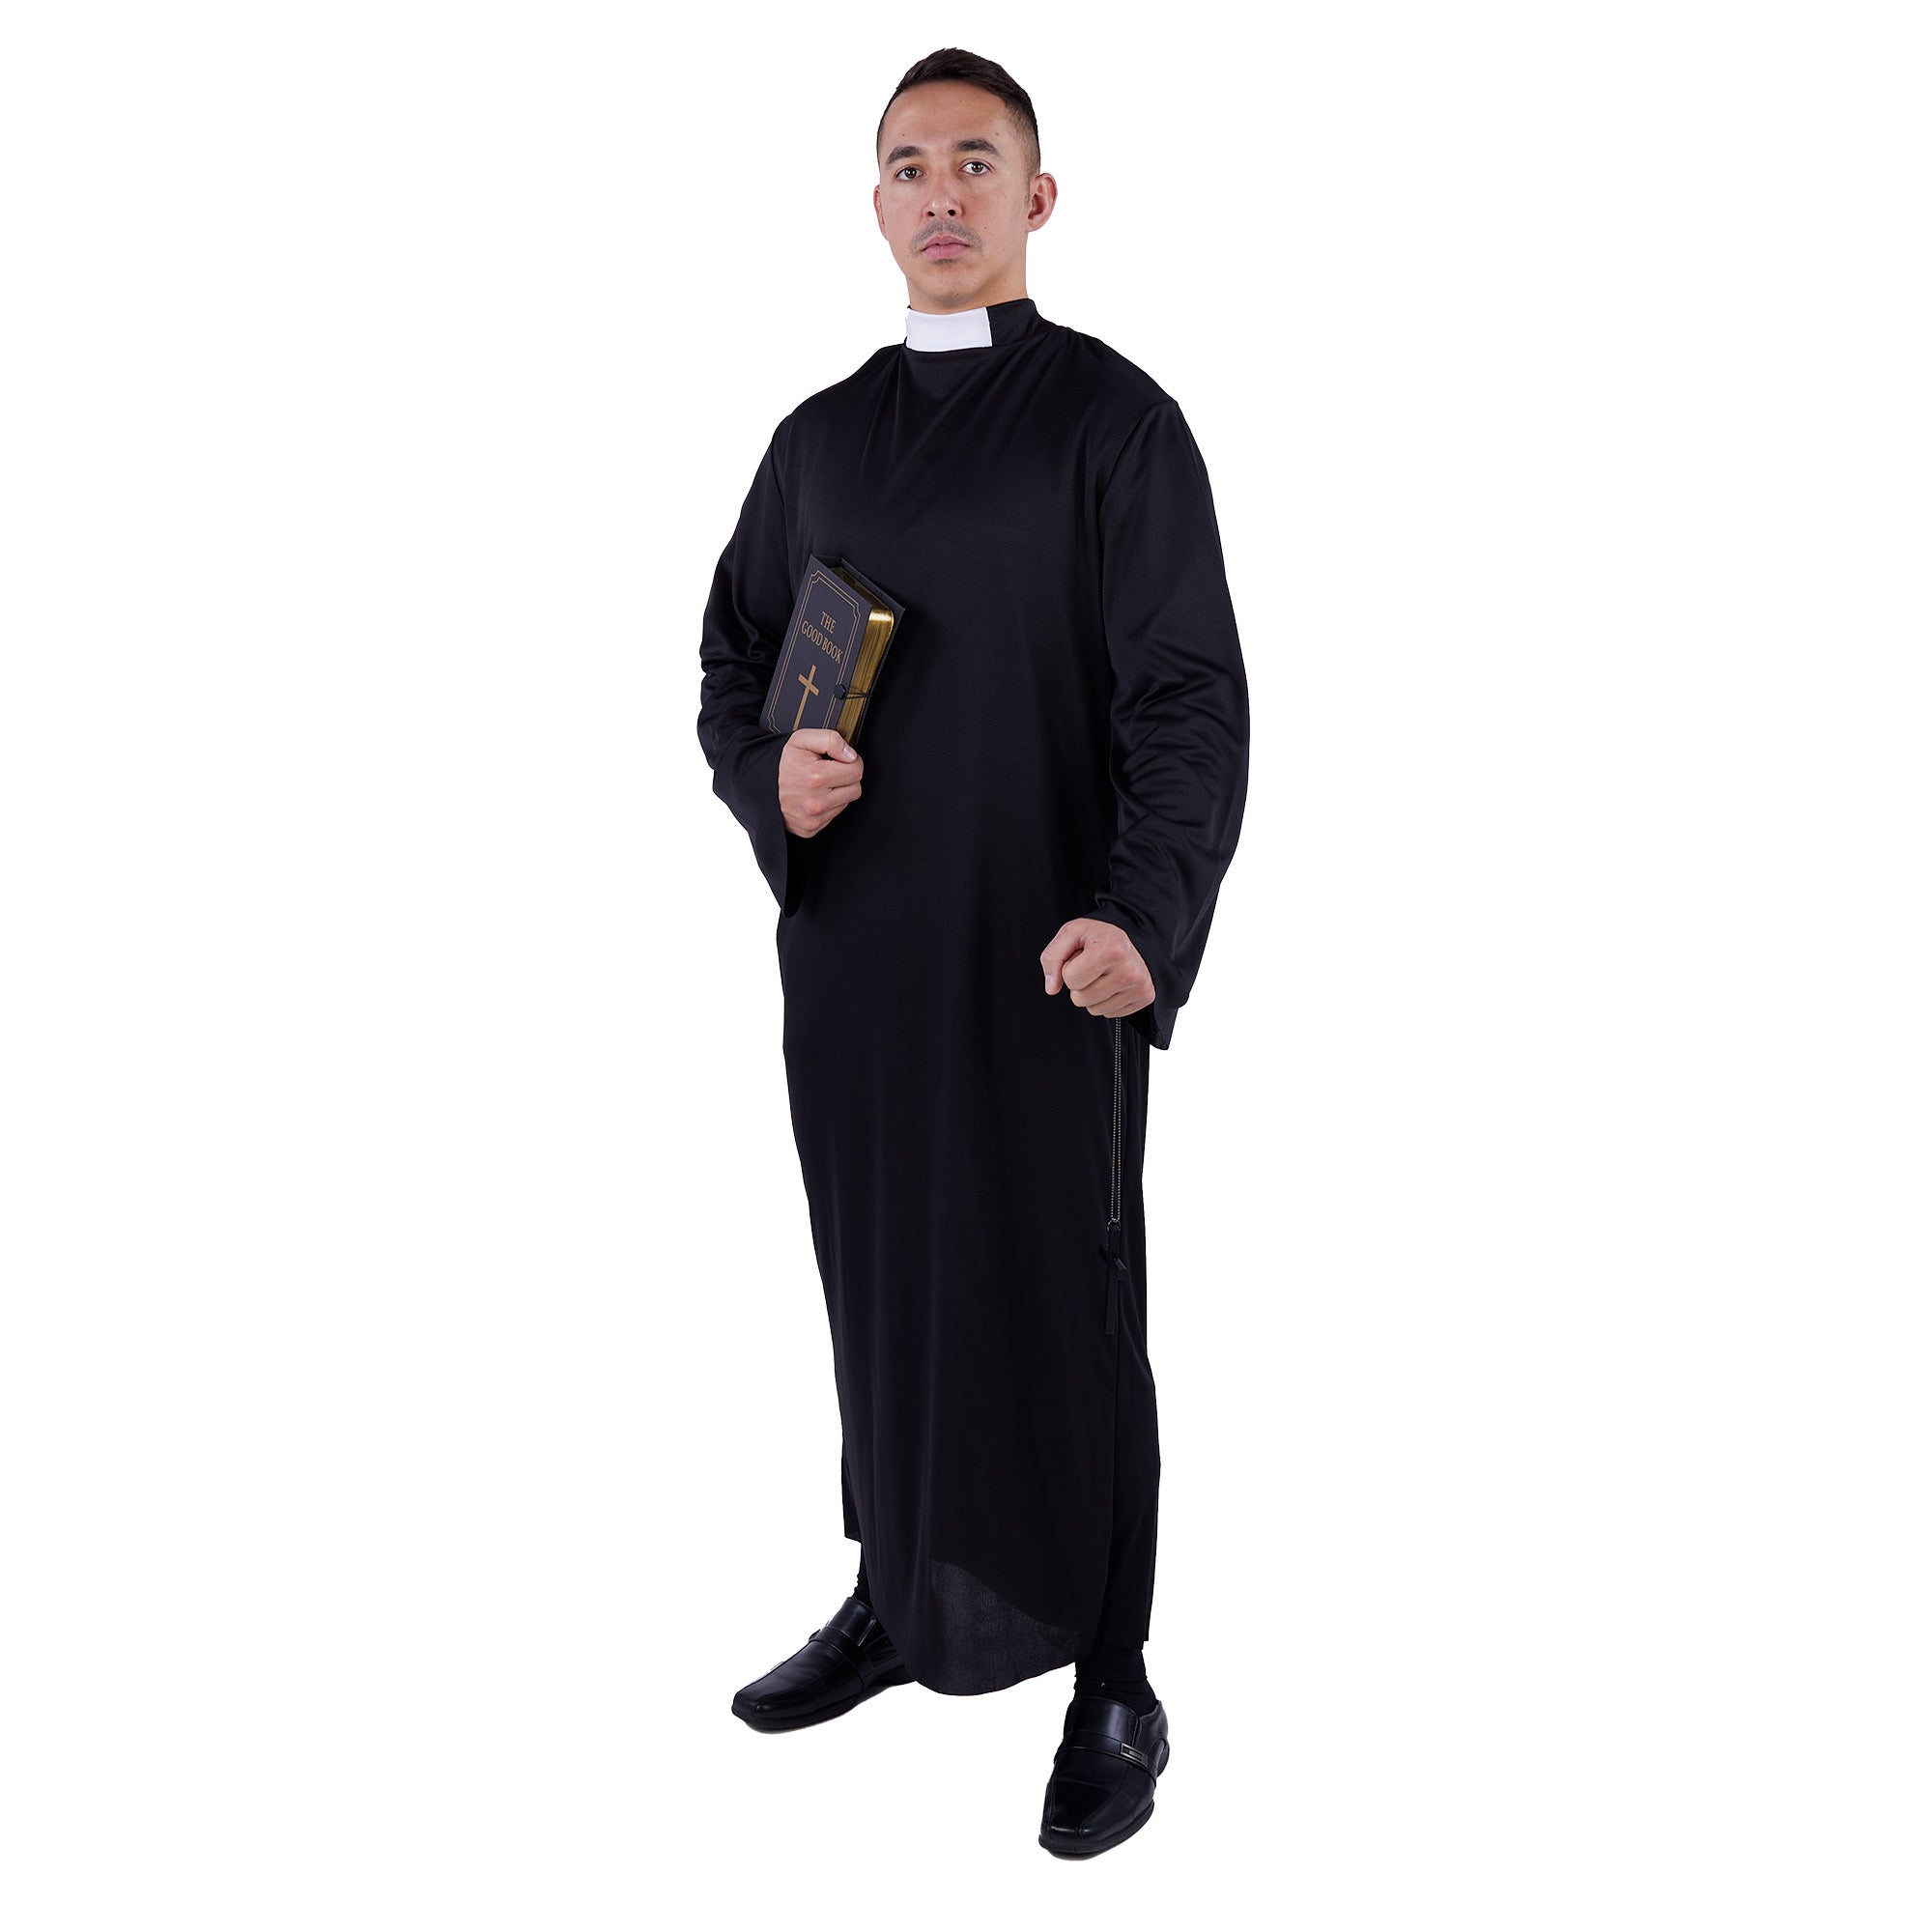 Priest Costume for Adults, Black Cassock with Chaplet | Party Expert